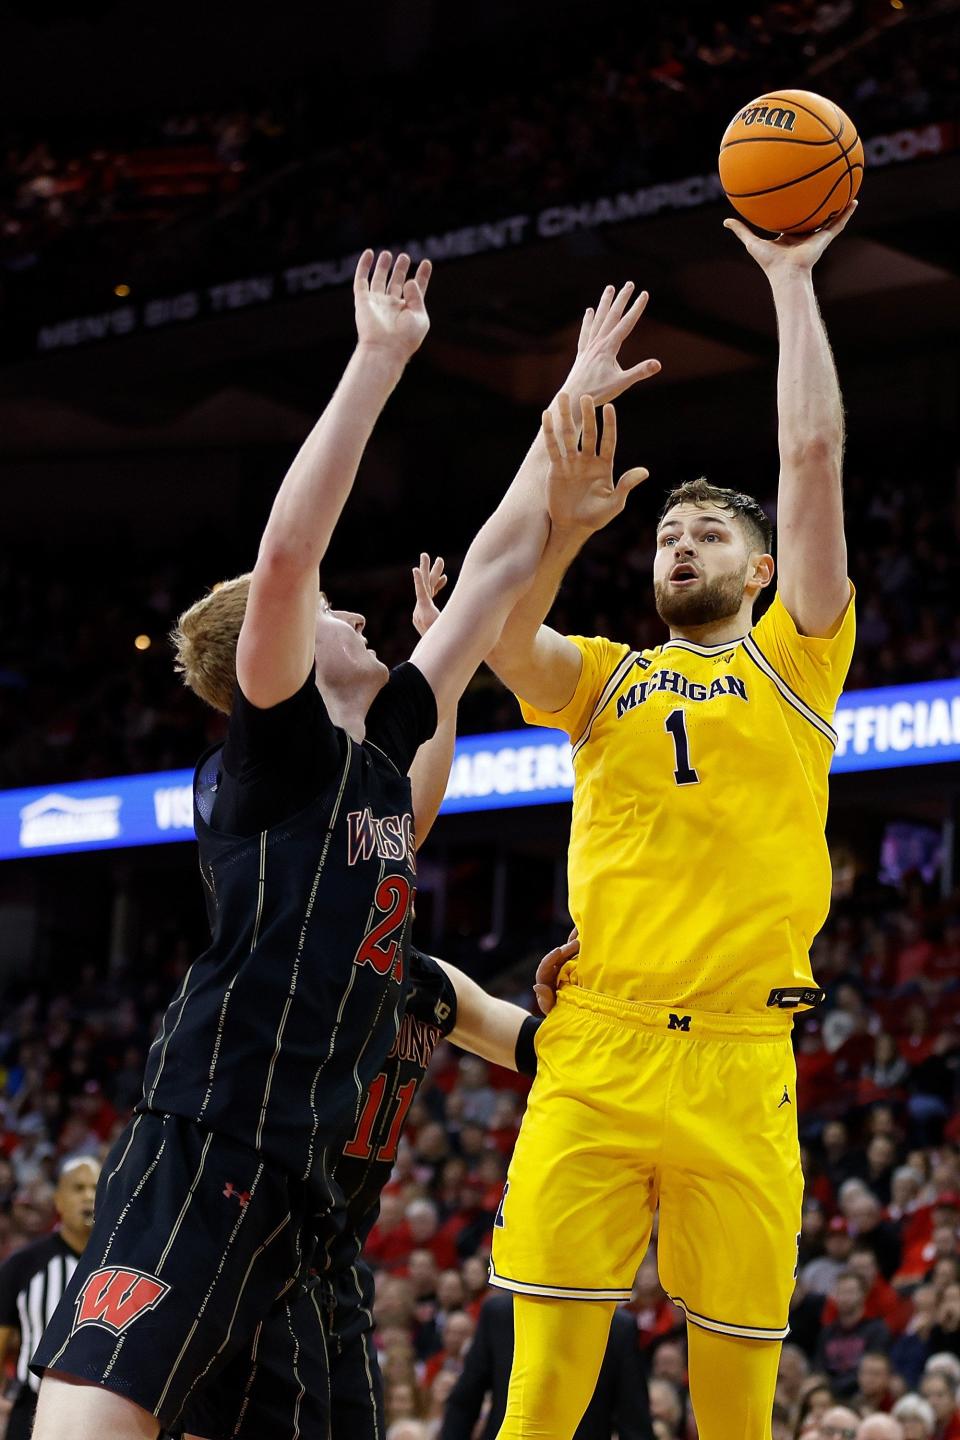 Michigan center Hunter Dickinson scores over Wisconsin's Steven Crowl during the first half on Tuesday, Feb. 14, 2023, in Madison, Wisconsin.